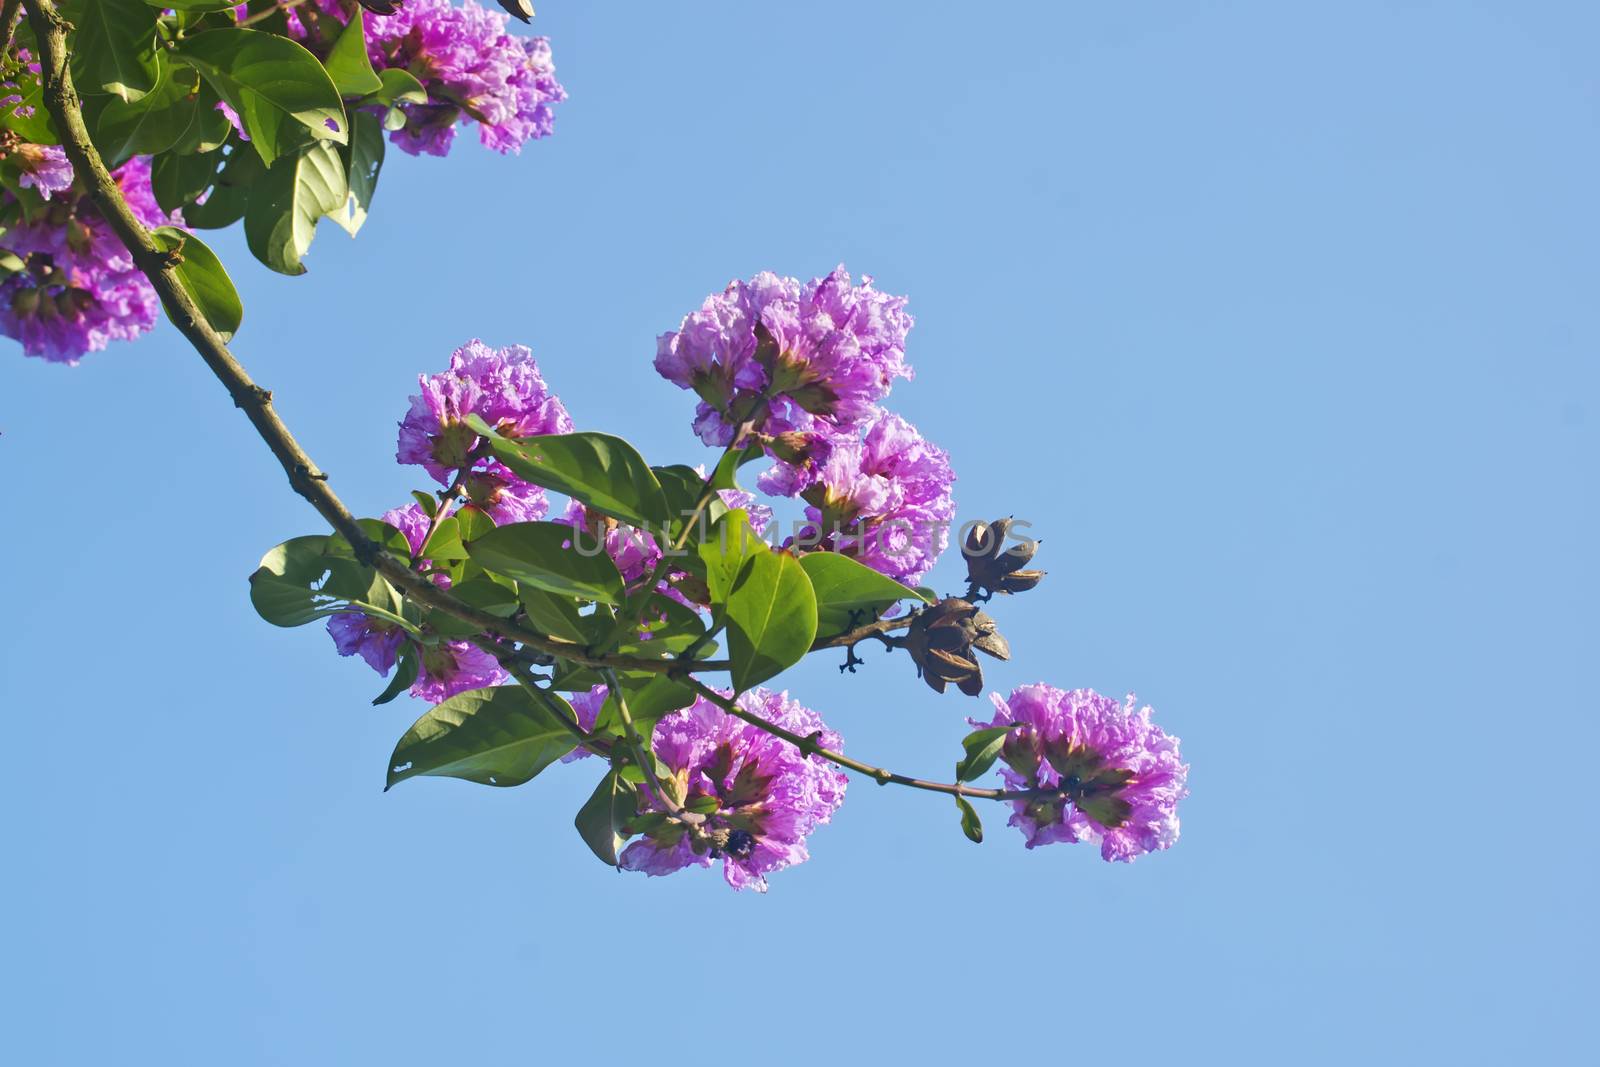 Its scientific name is Lagerstroemia indica flowers